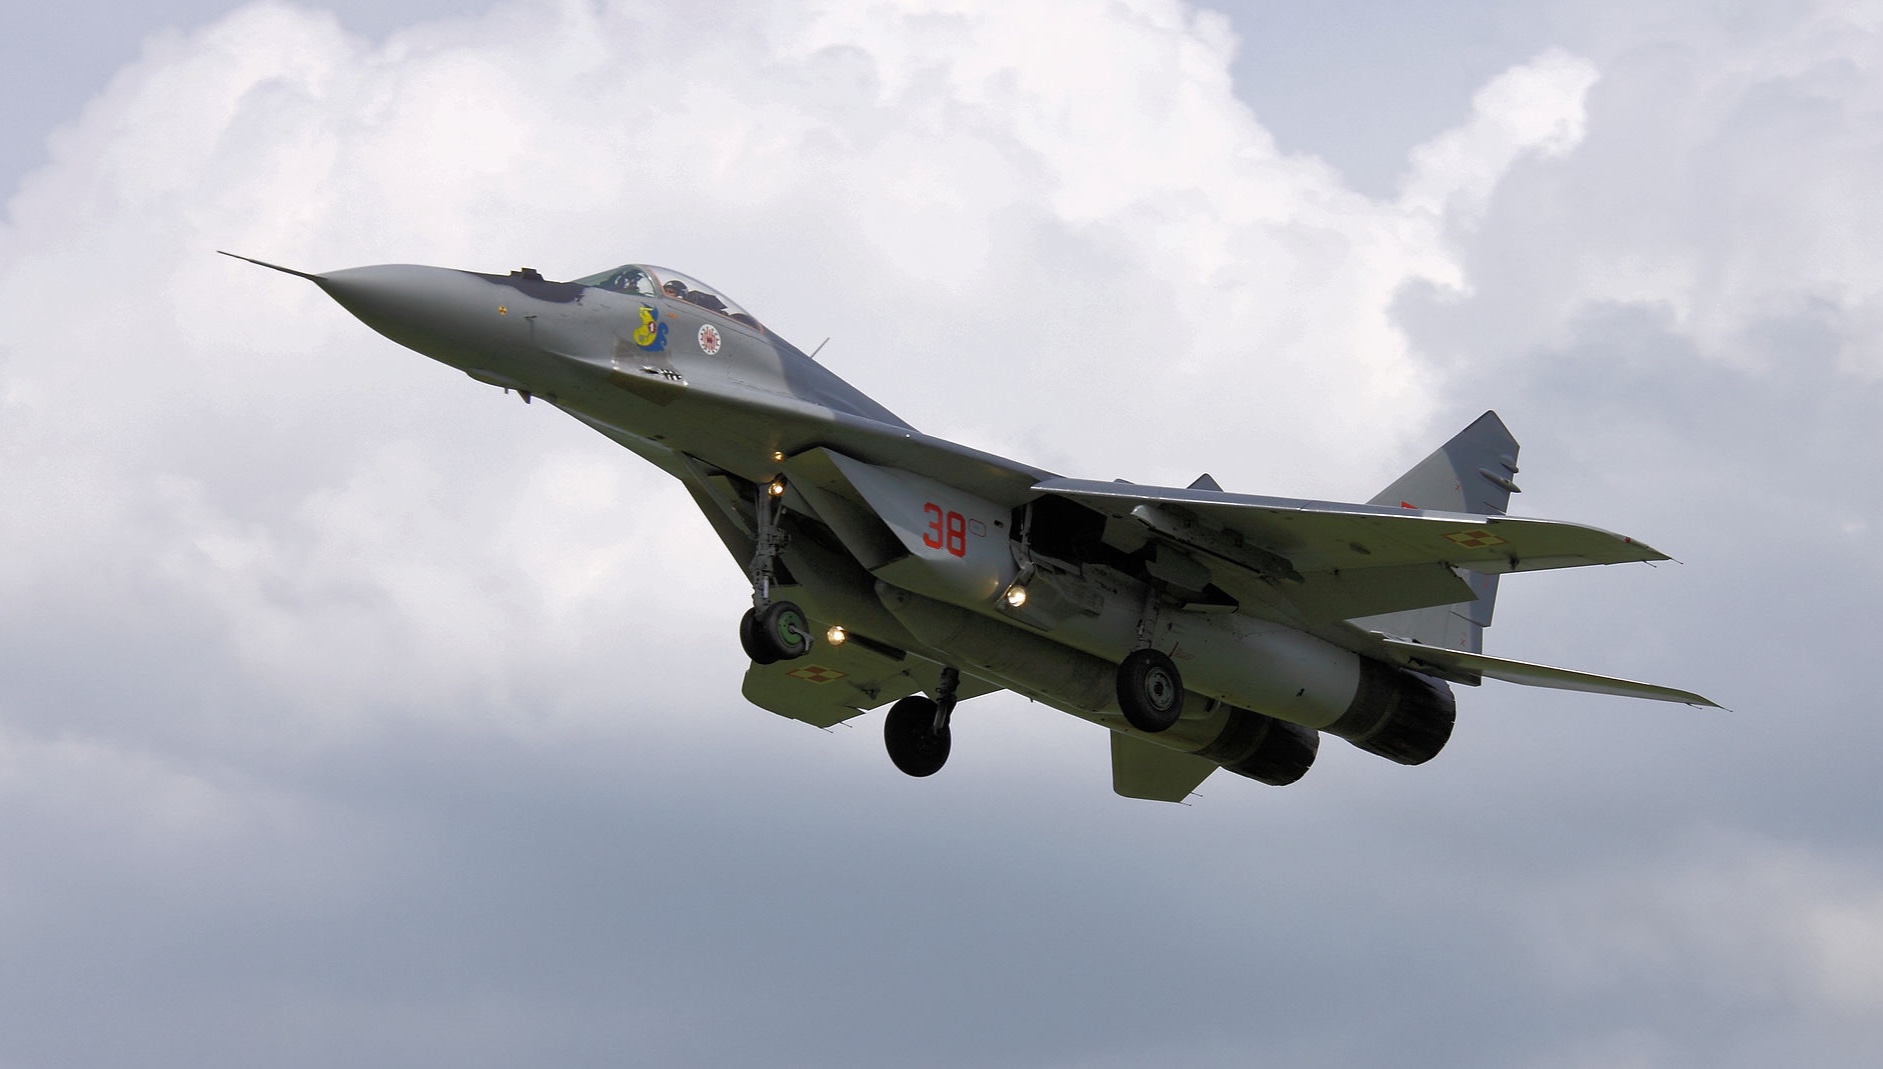 “Poland is not a part of this war.” Prime Minister’s statement on the transfer of MIG-29 to Ukraine